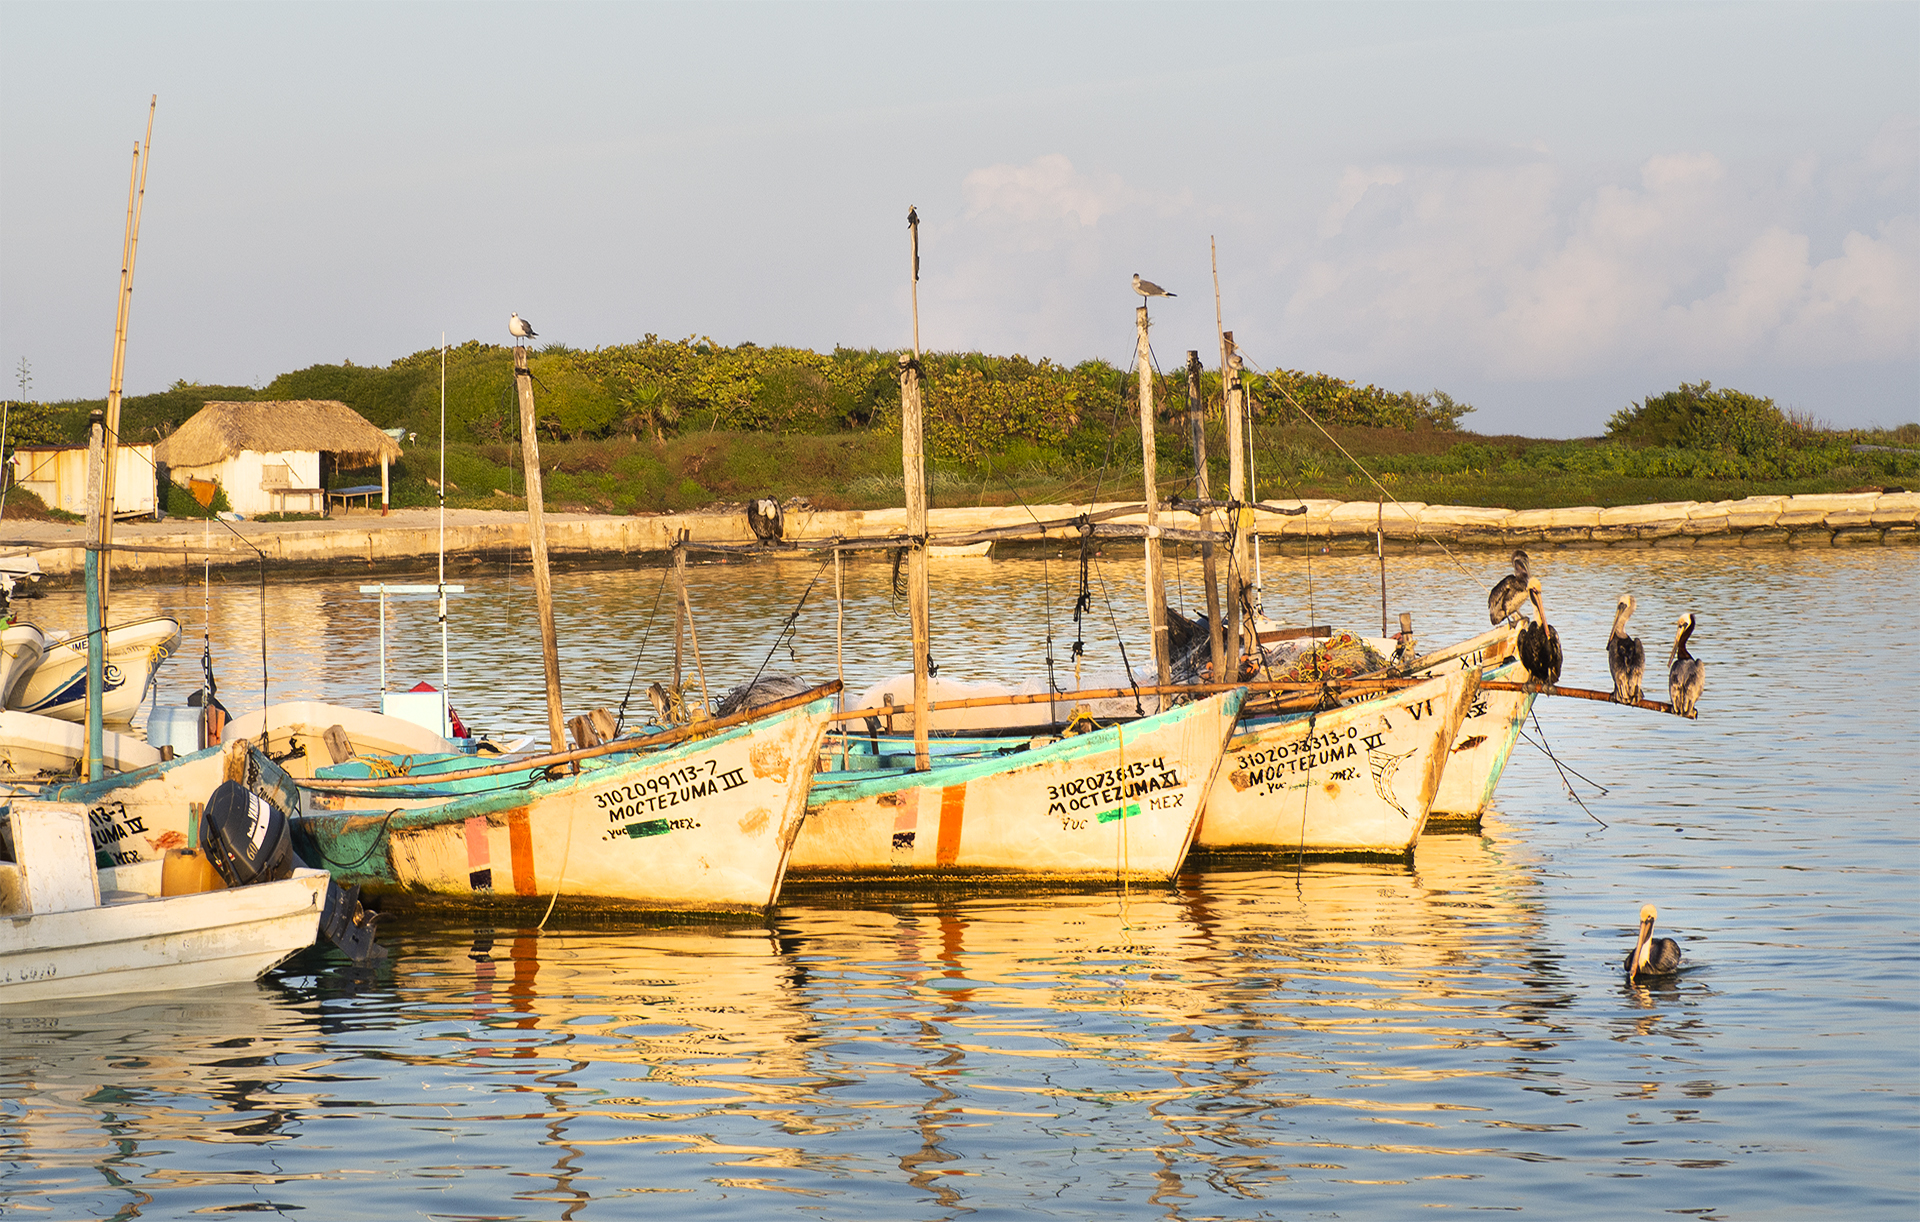 Five pelicans are sitting on a boat waiting in the morning light for the fishermen to return with breakfast